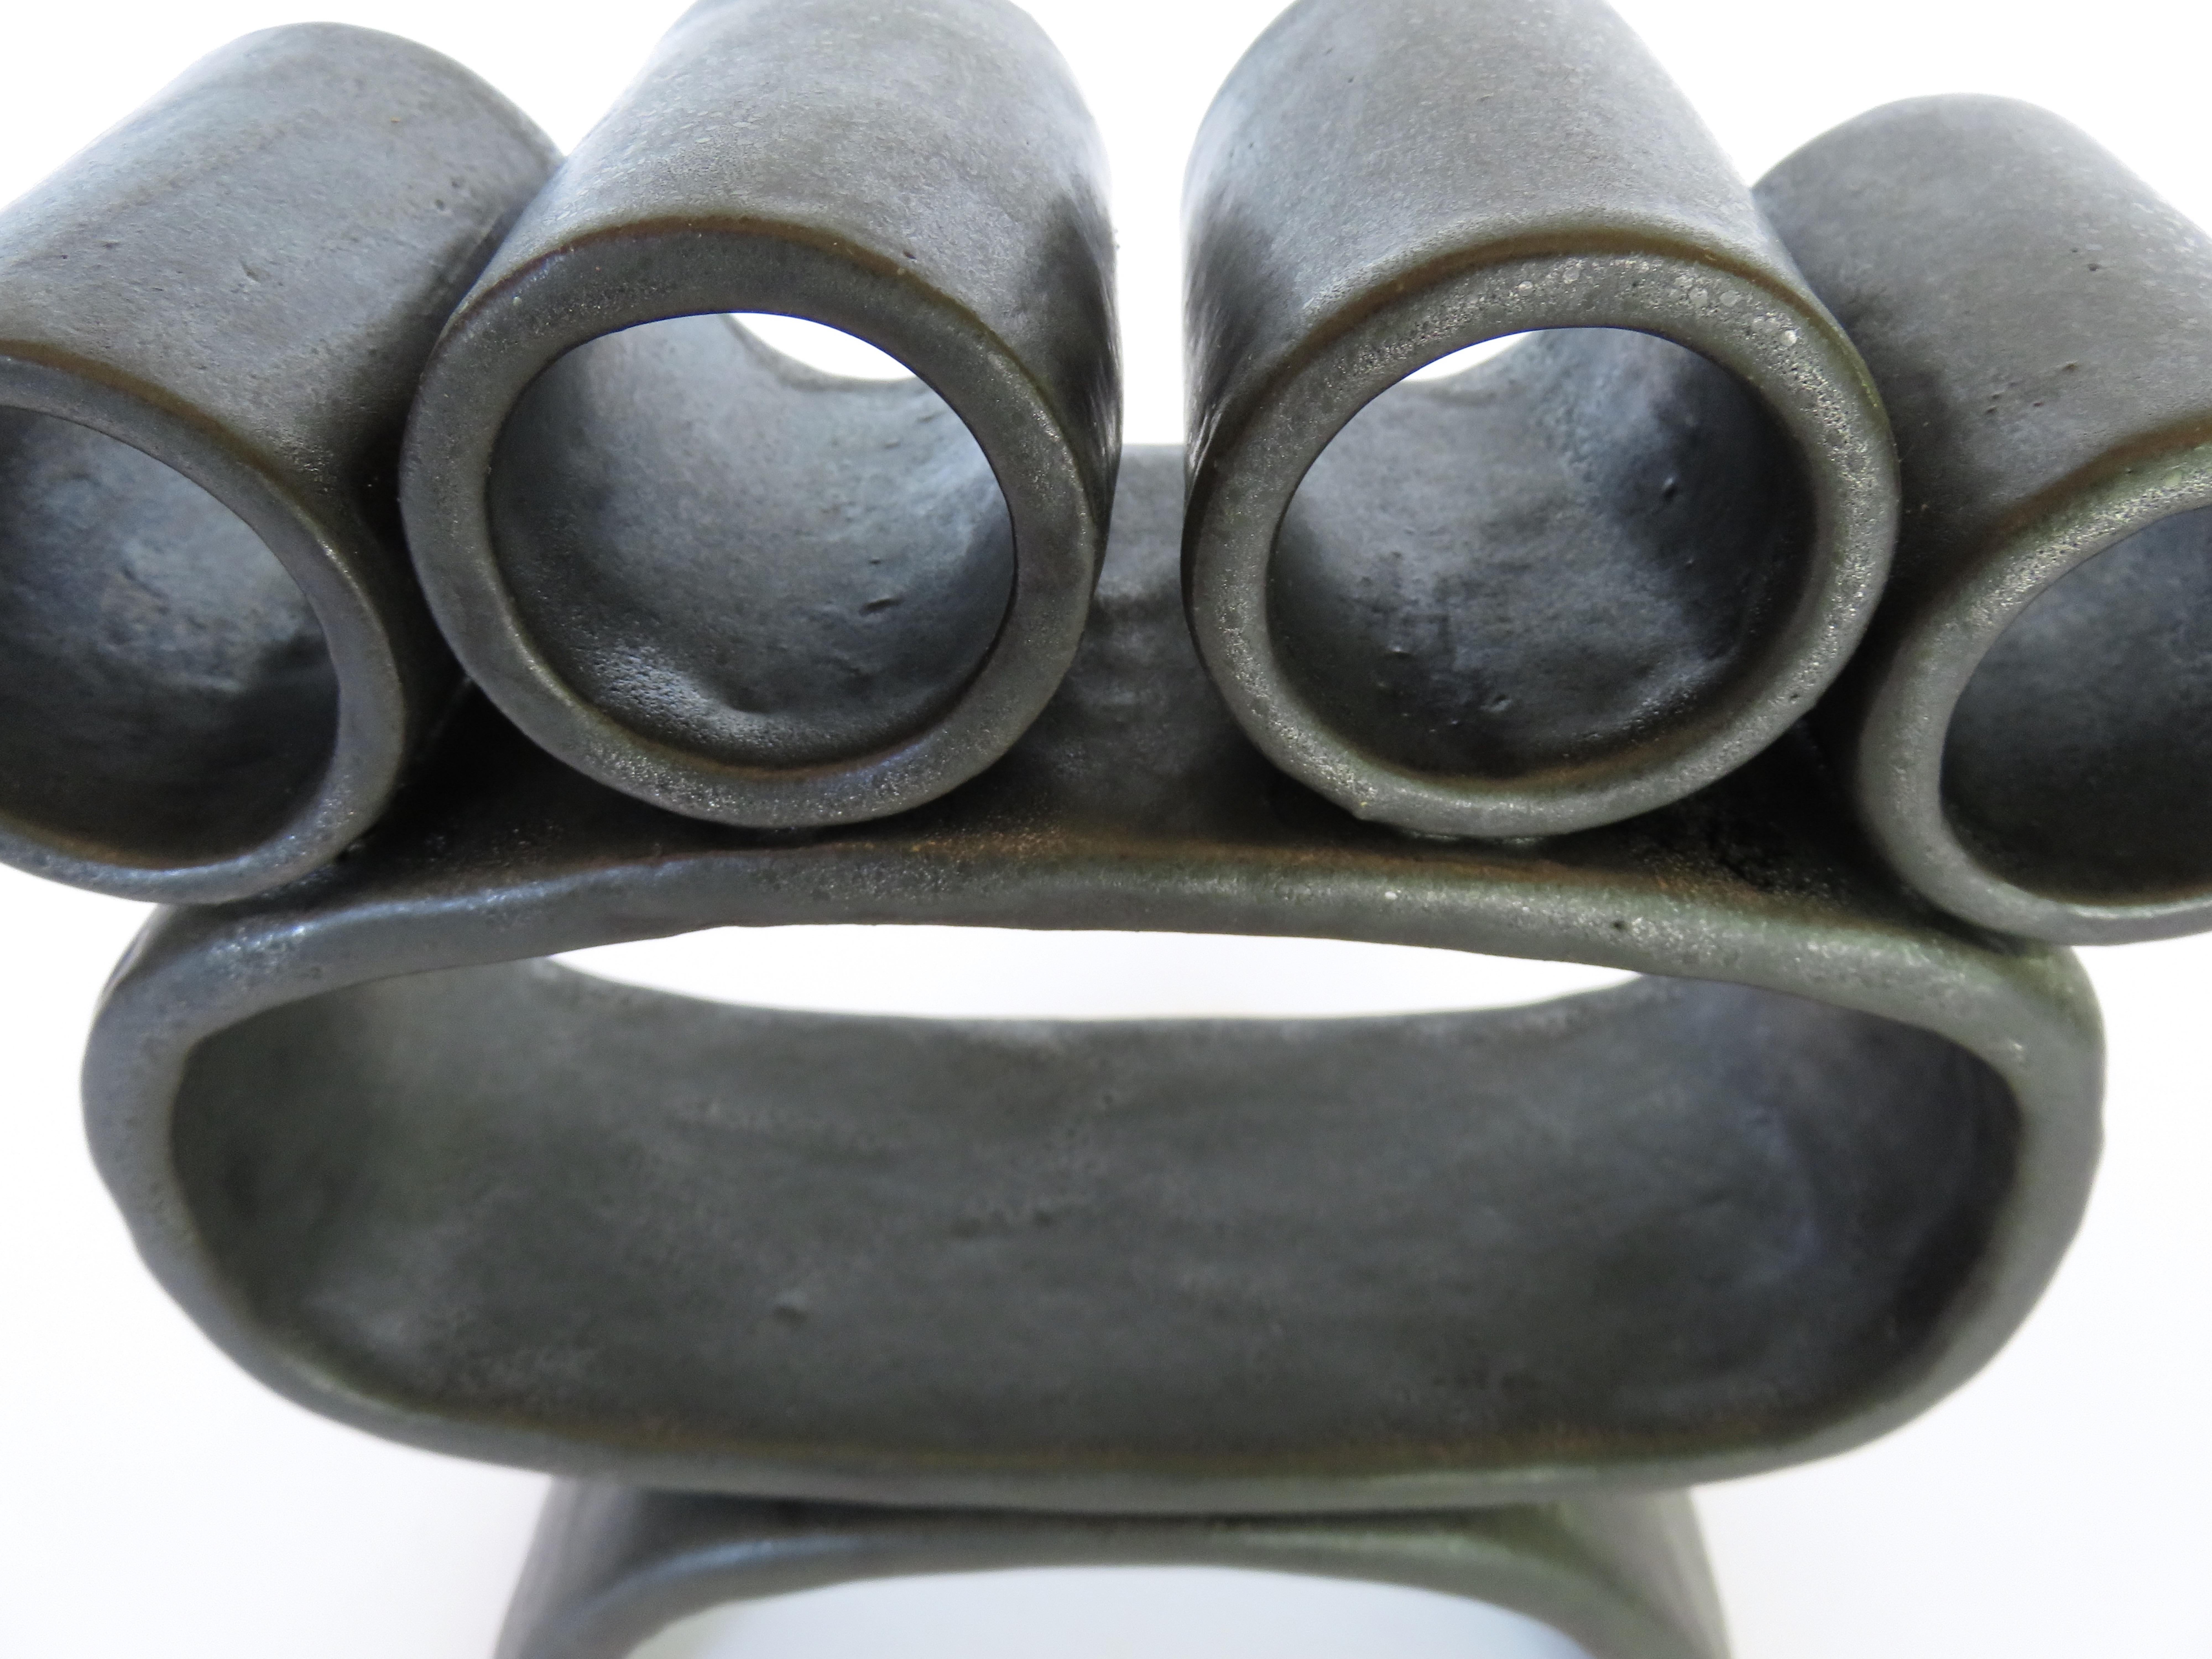 Contemporary Metallic Black Hand-Built Ceramic Sculpture with Small Rings on Legs